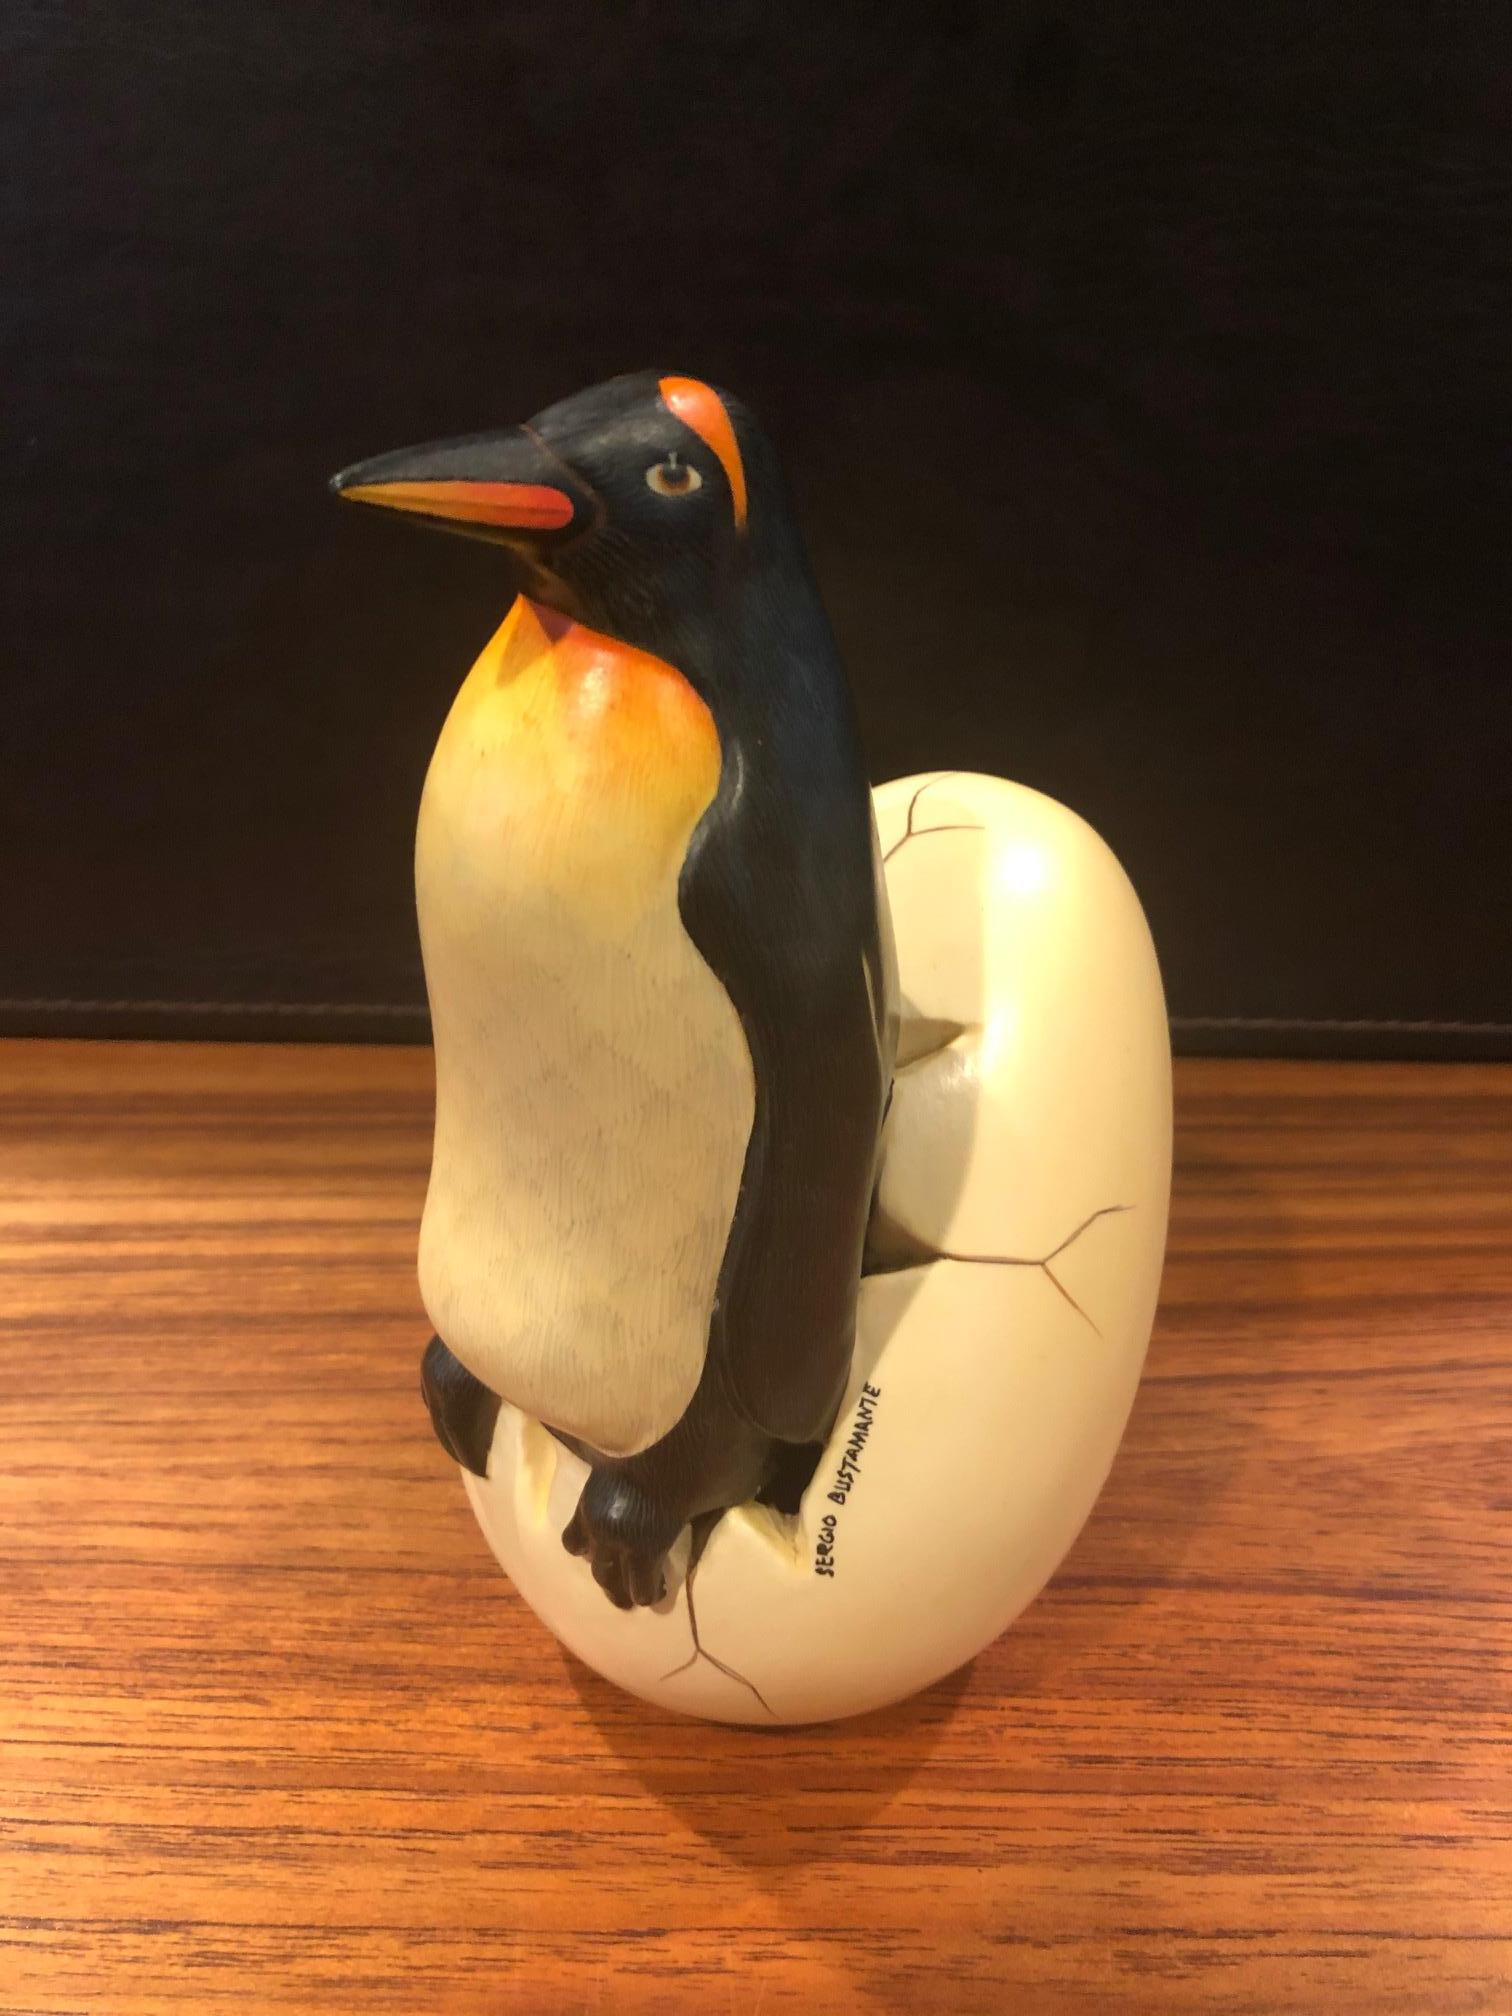 Whimsical Ceramic Hatching Penguin from Egg Sculpture by Sergio Bustamante 3